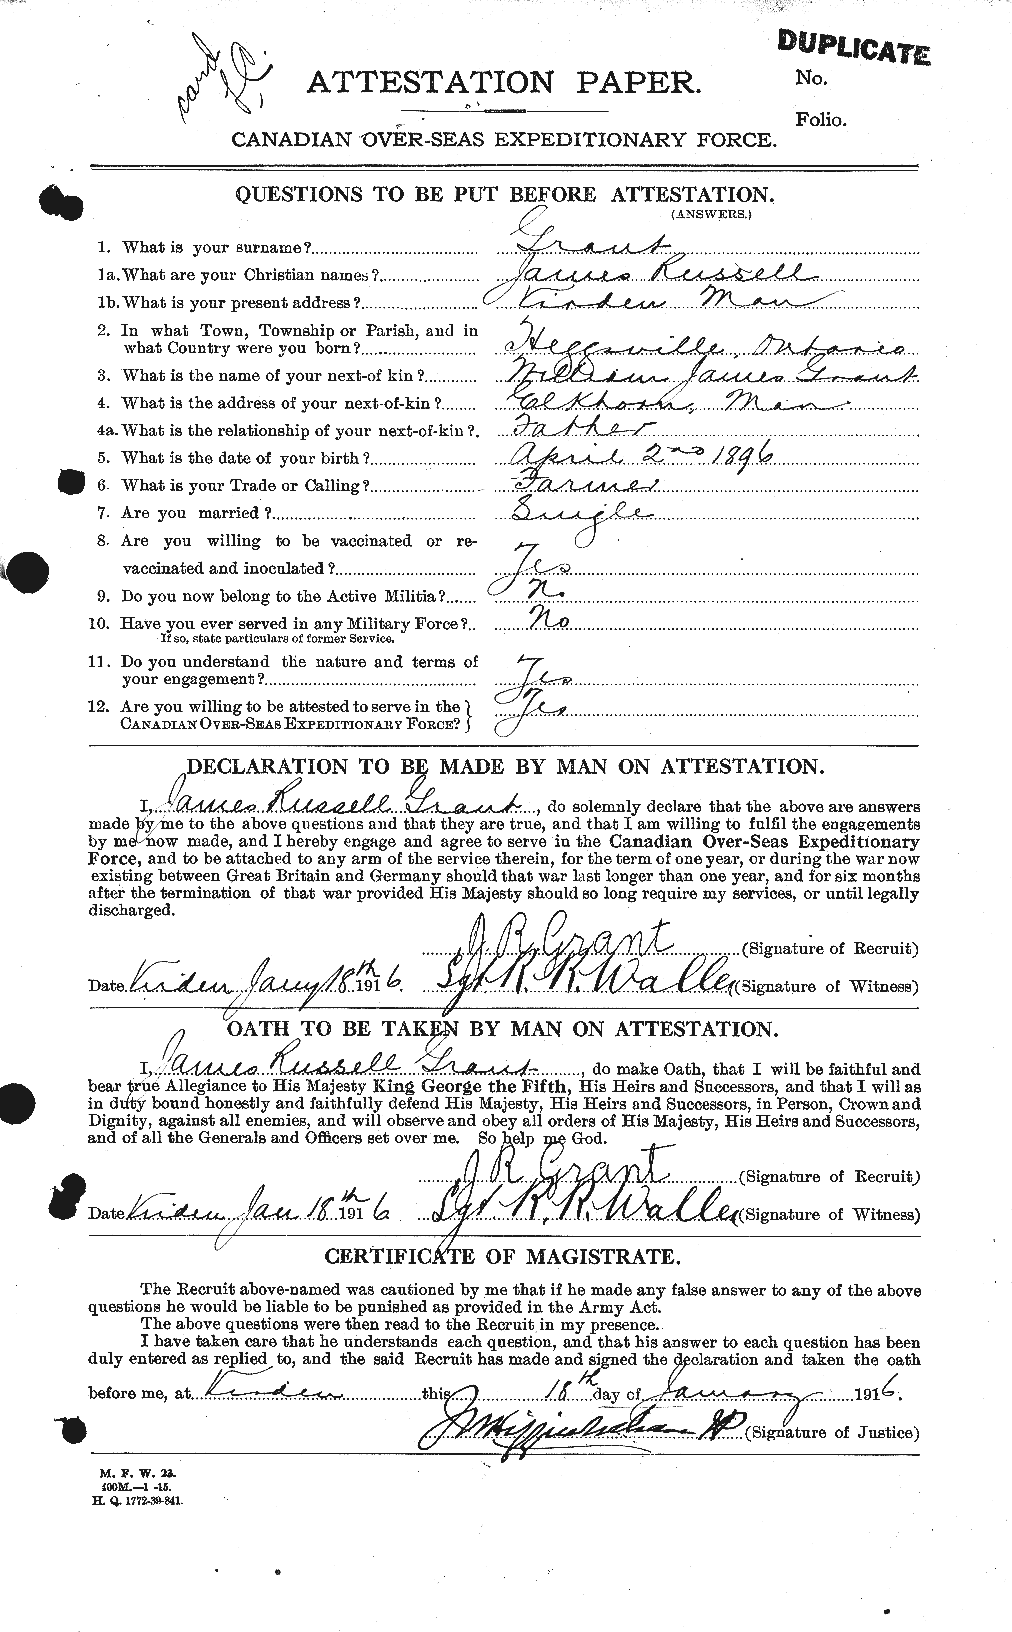 Personnel Records of the First World War - CEF 357101a